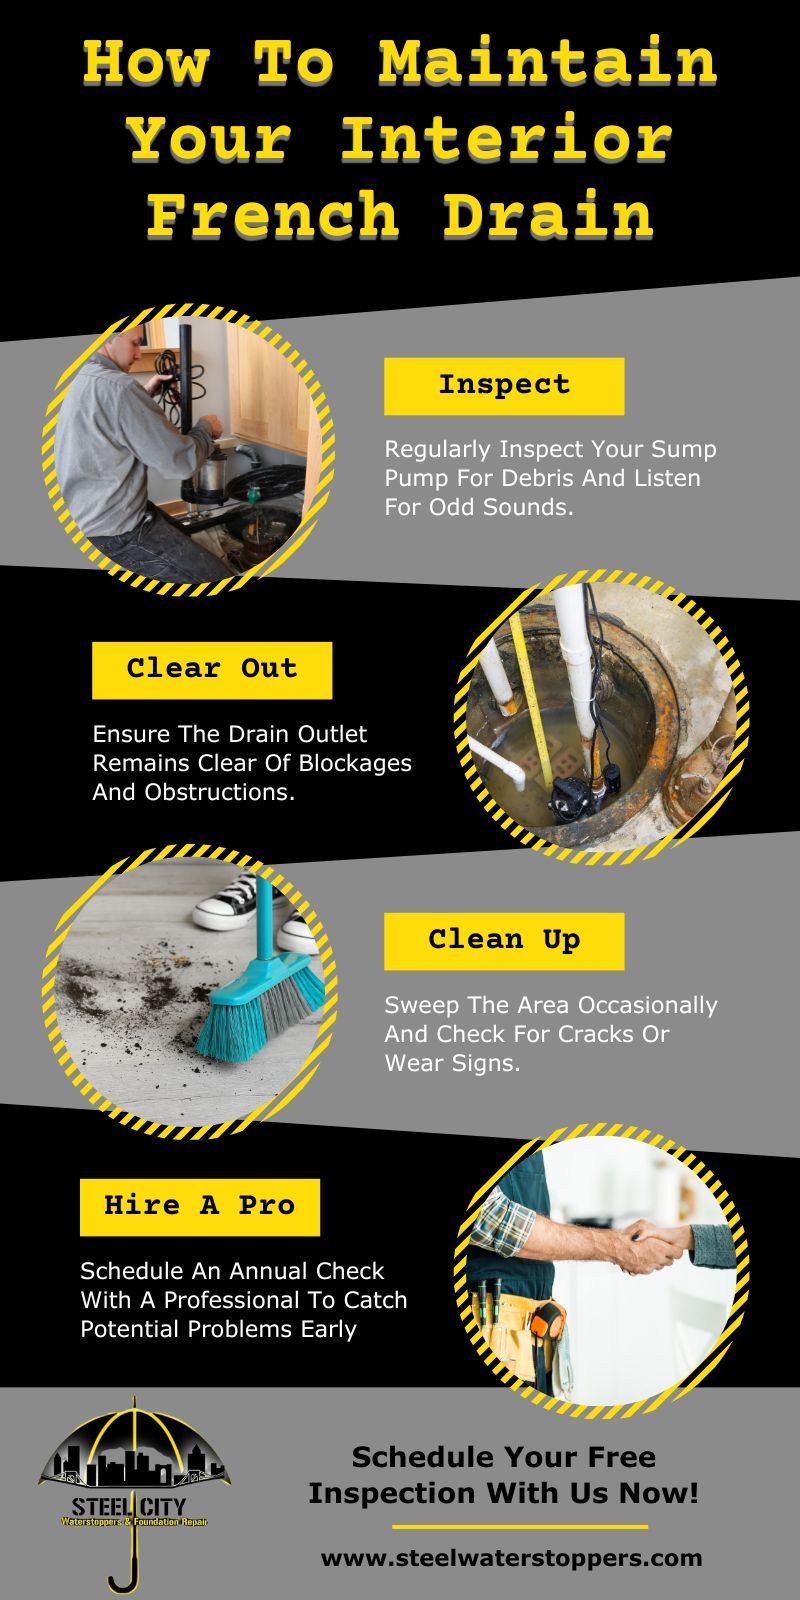 How to maintain your interior french drain infographic